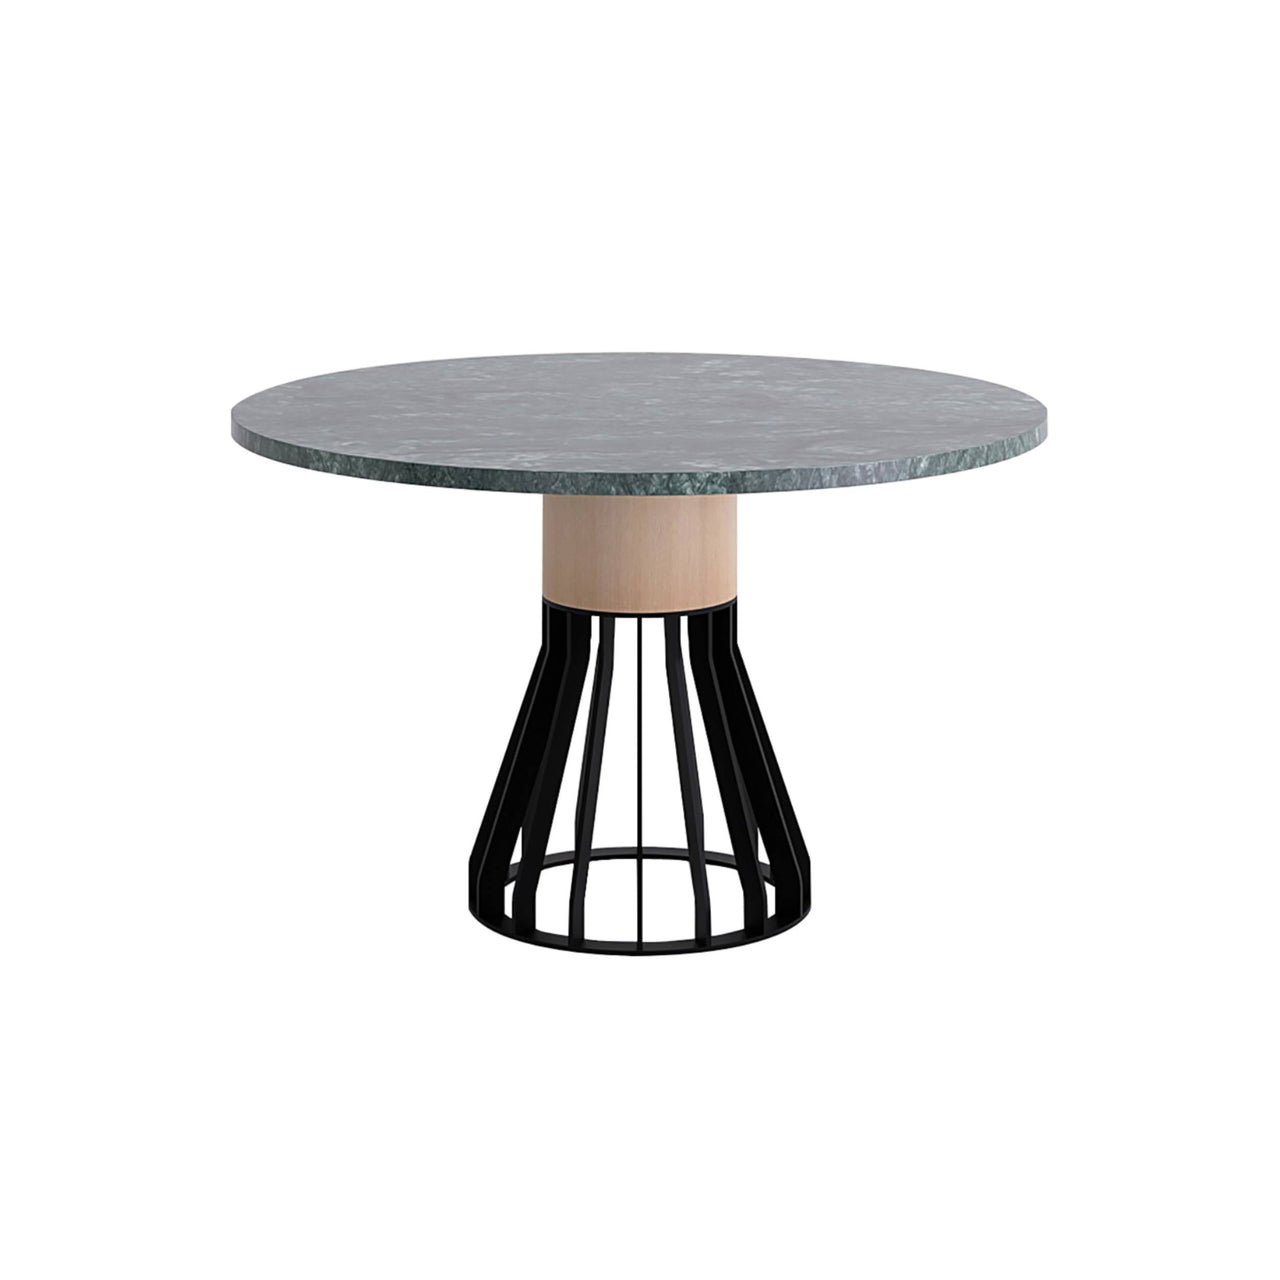 Mewoma Round Dining Table Small - 47.2